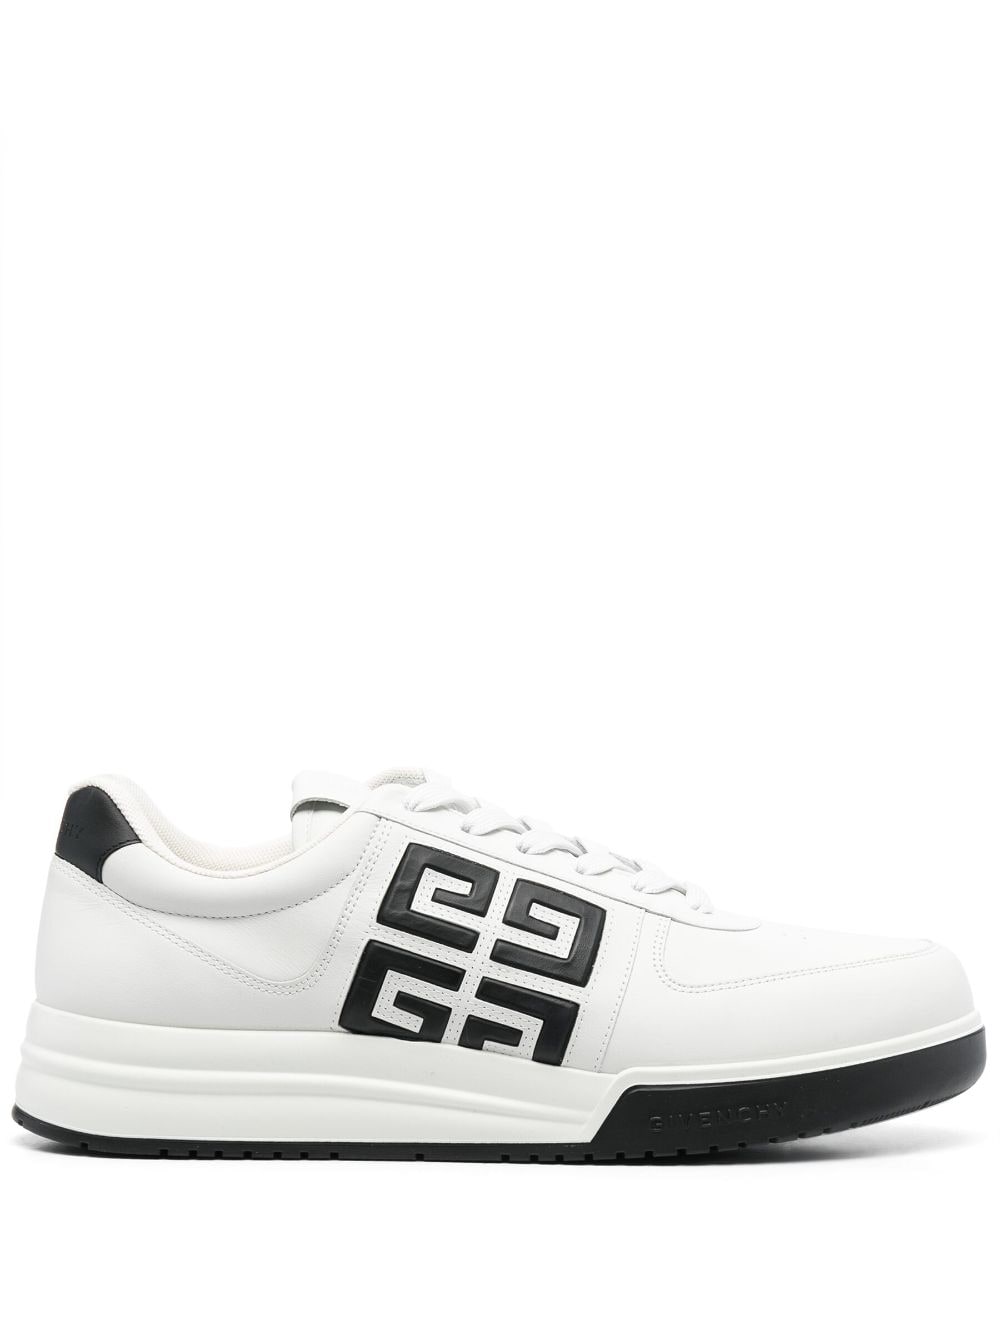 Givenchy contrasting-logo leather sneakers - White von Givenchy